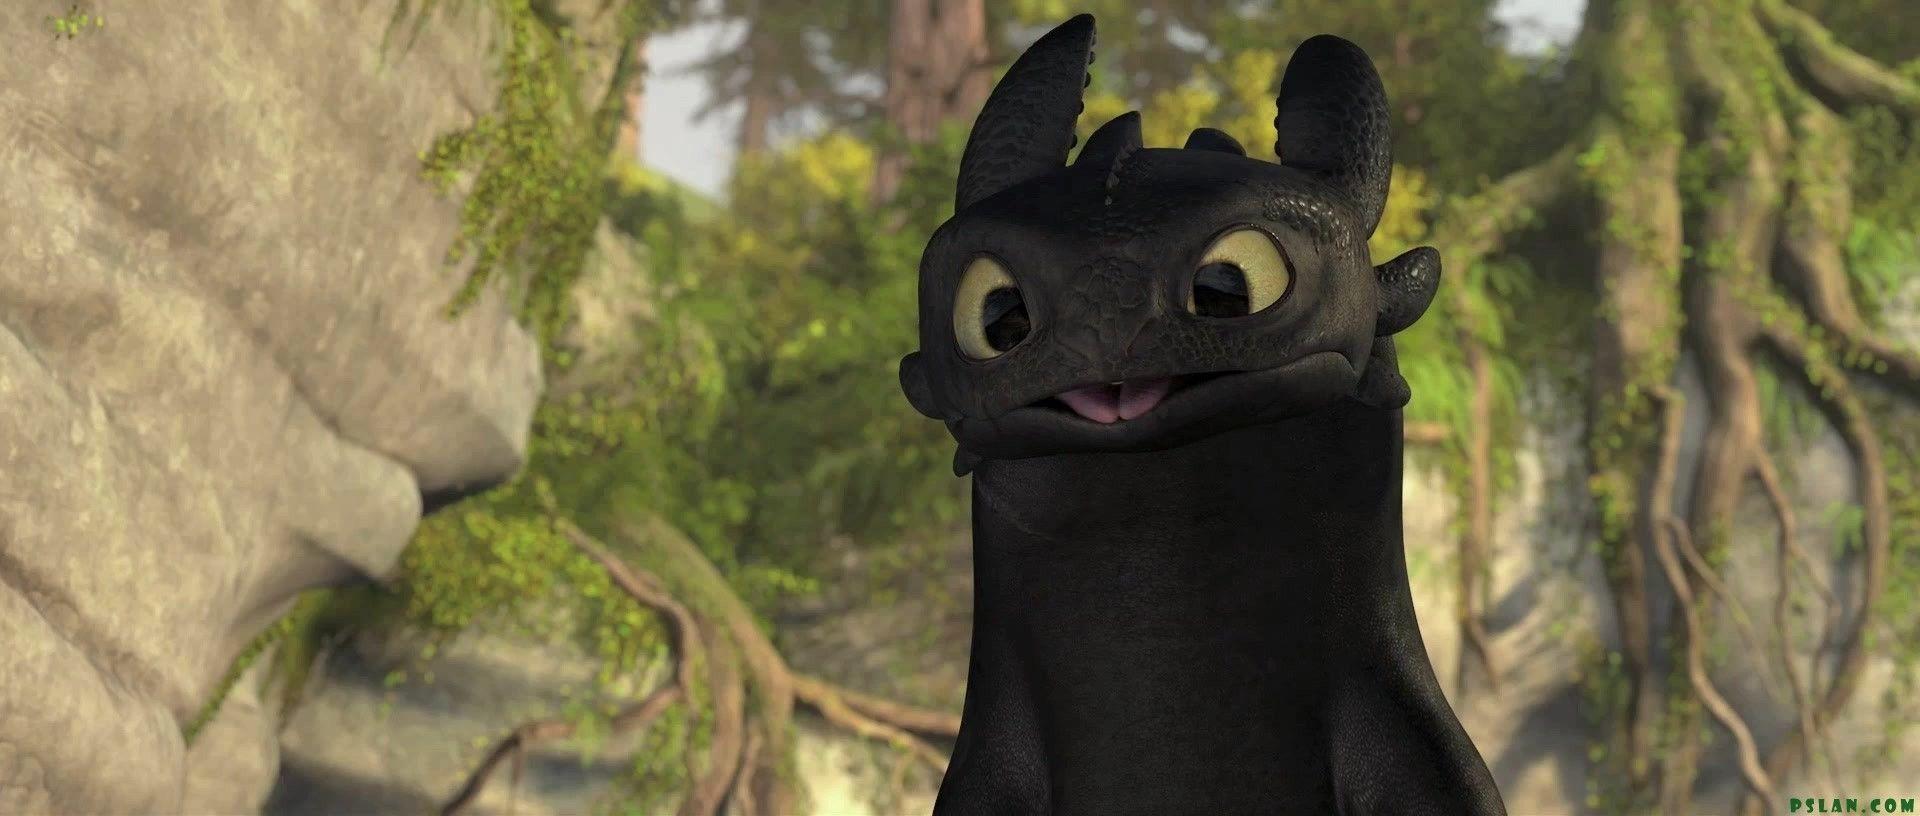 Toothless to Train Your Dragon Photo